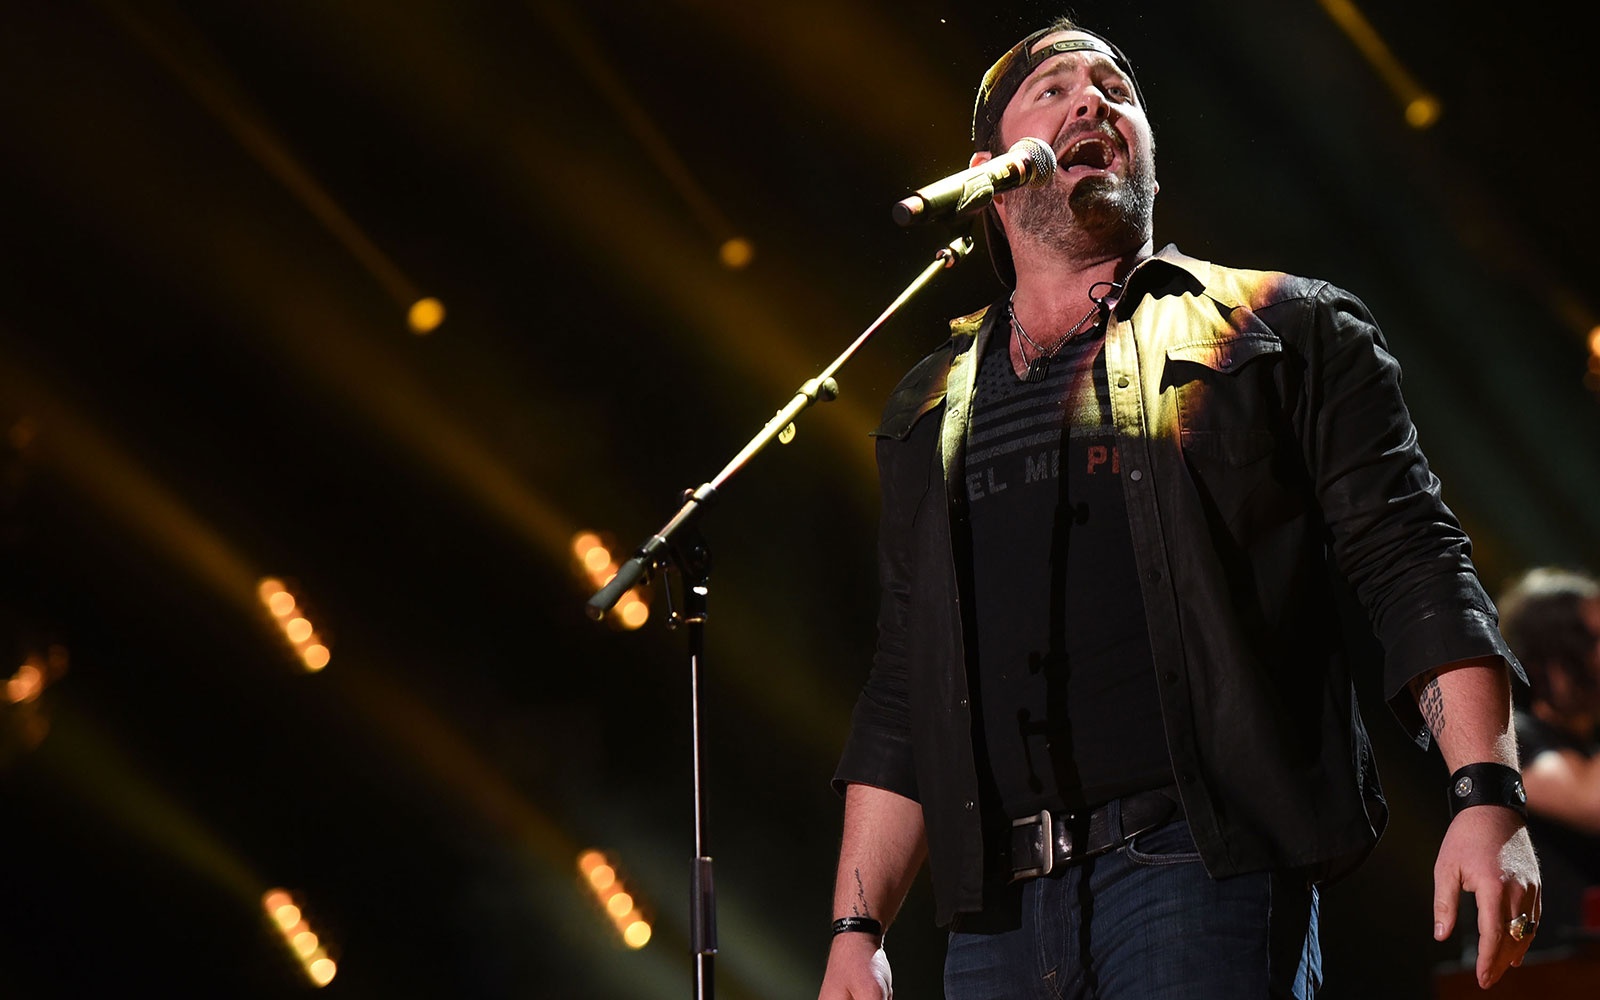 Talking Travel With Country Music Singer-Songwriter Lee Brice